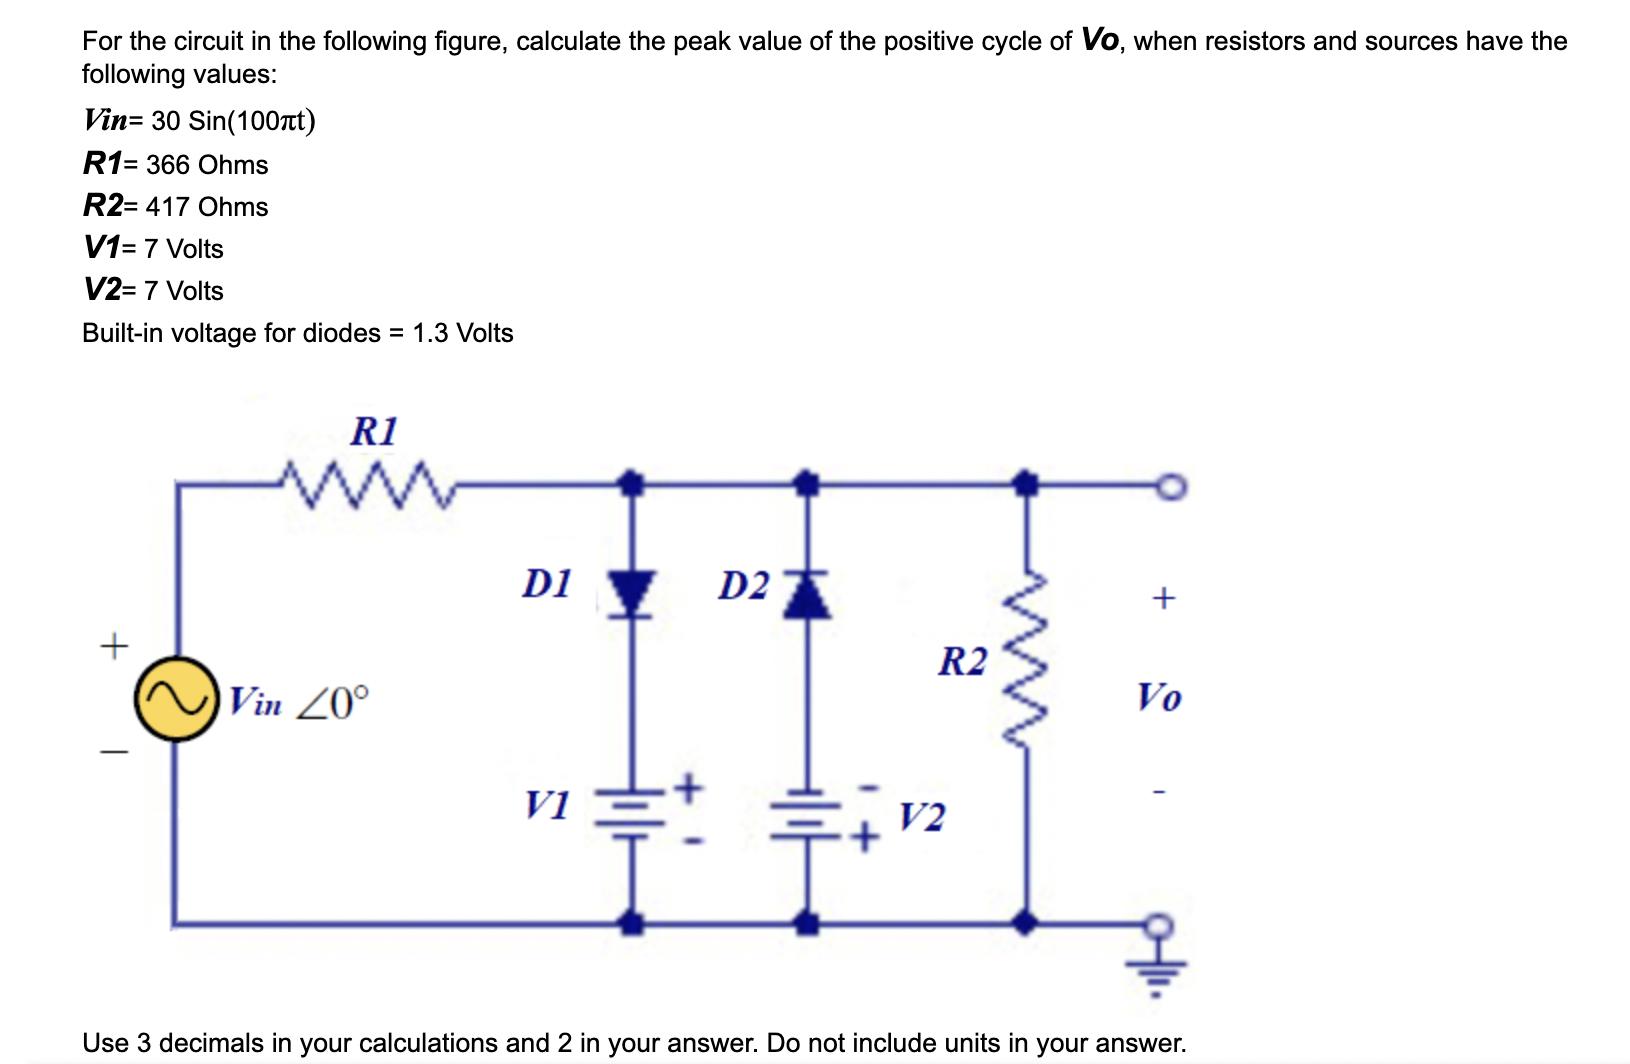 For the circuit in the following figure, calculate the peak value of the positive cycle of Vo, when resistors